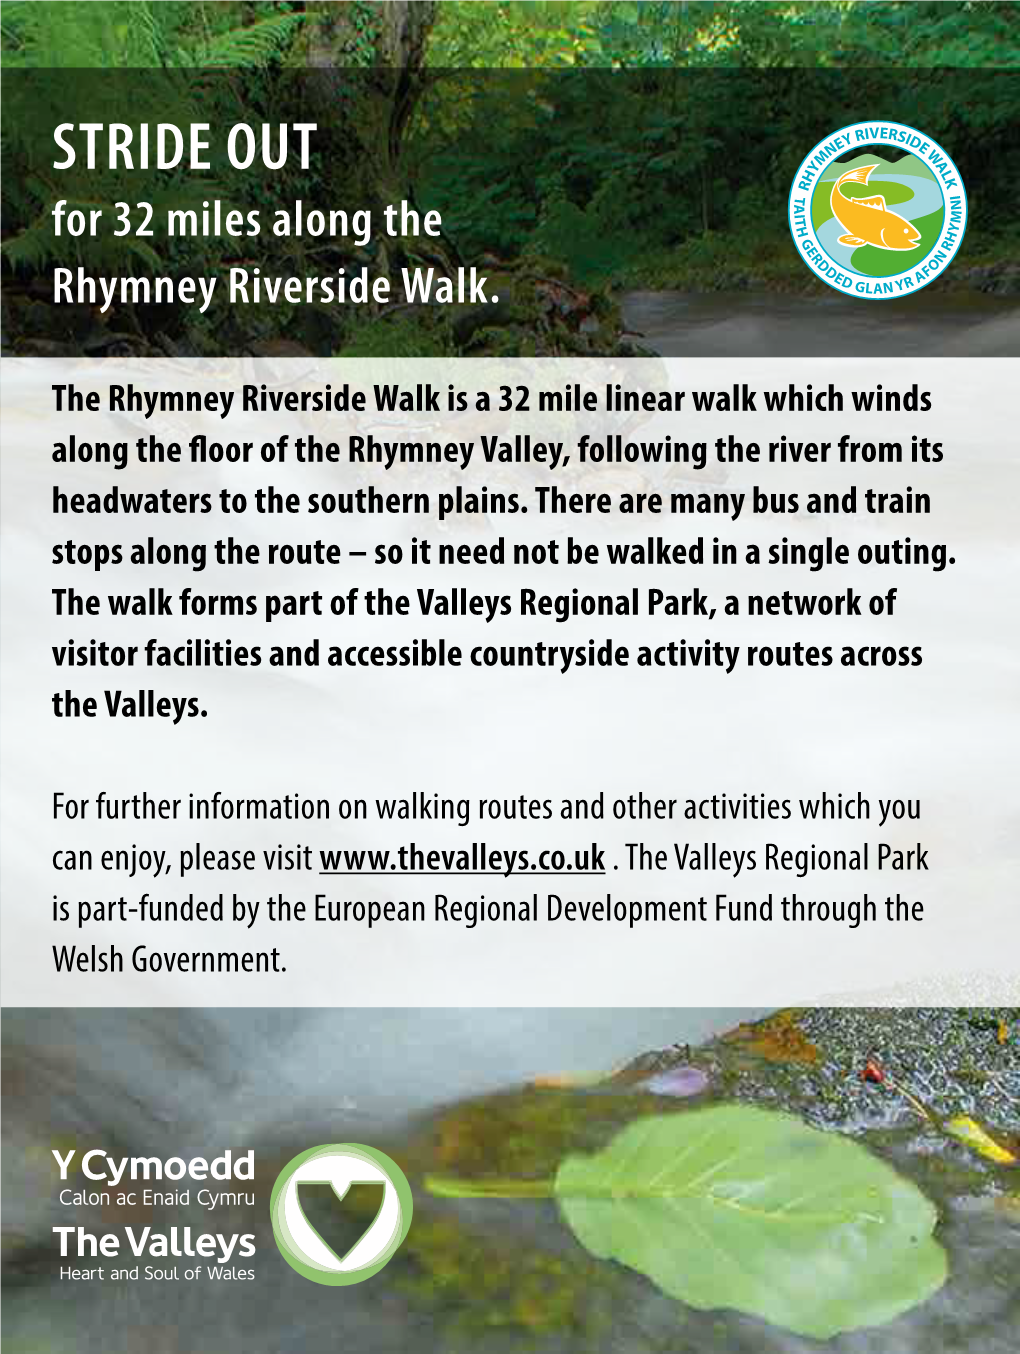 STRIDE out for 32 Miles Along the Rhymney Riverside Walk